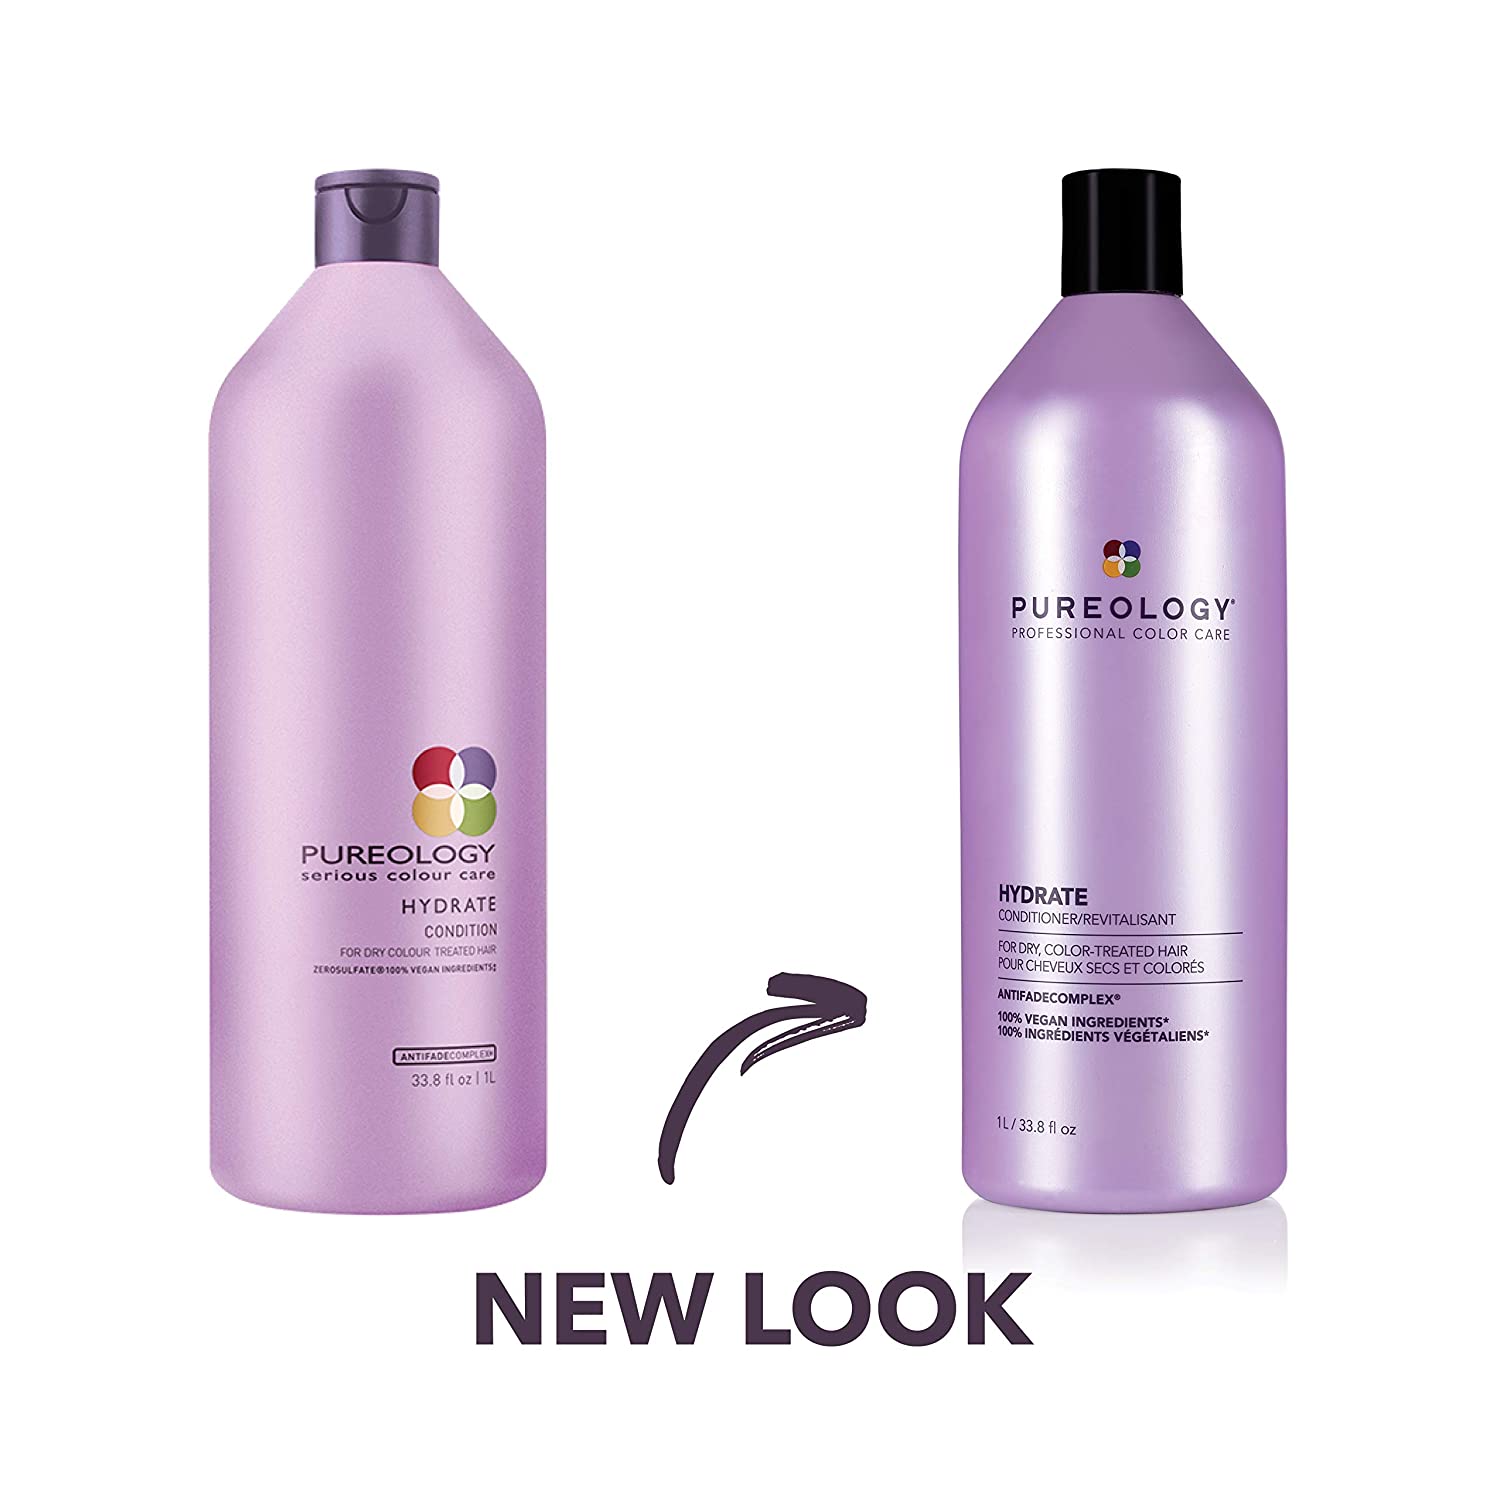 Pureology HYDRATE Conditioner for Dry Color Treated Hair 1L